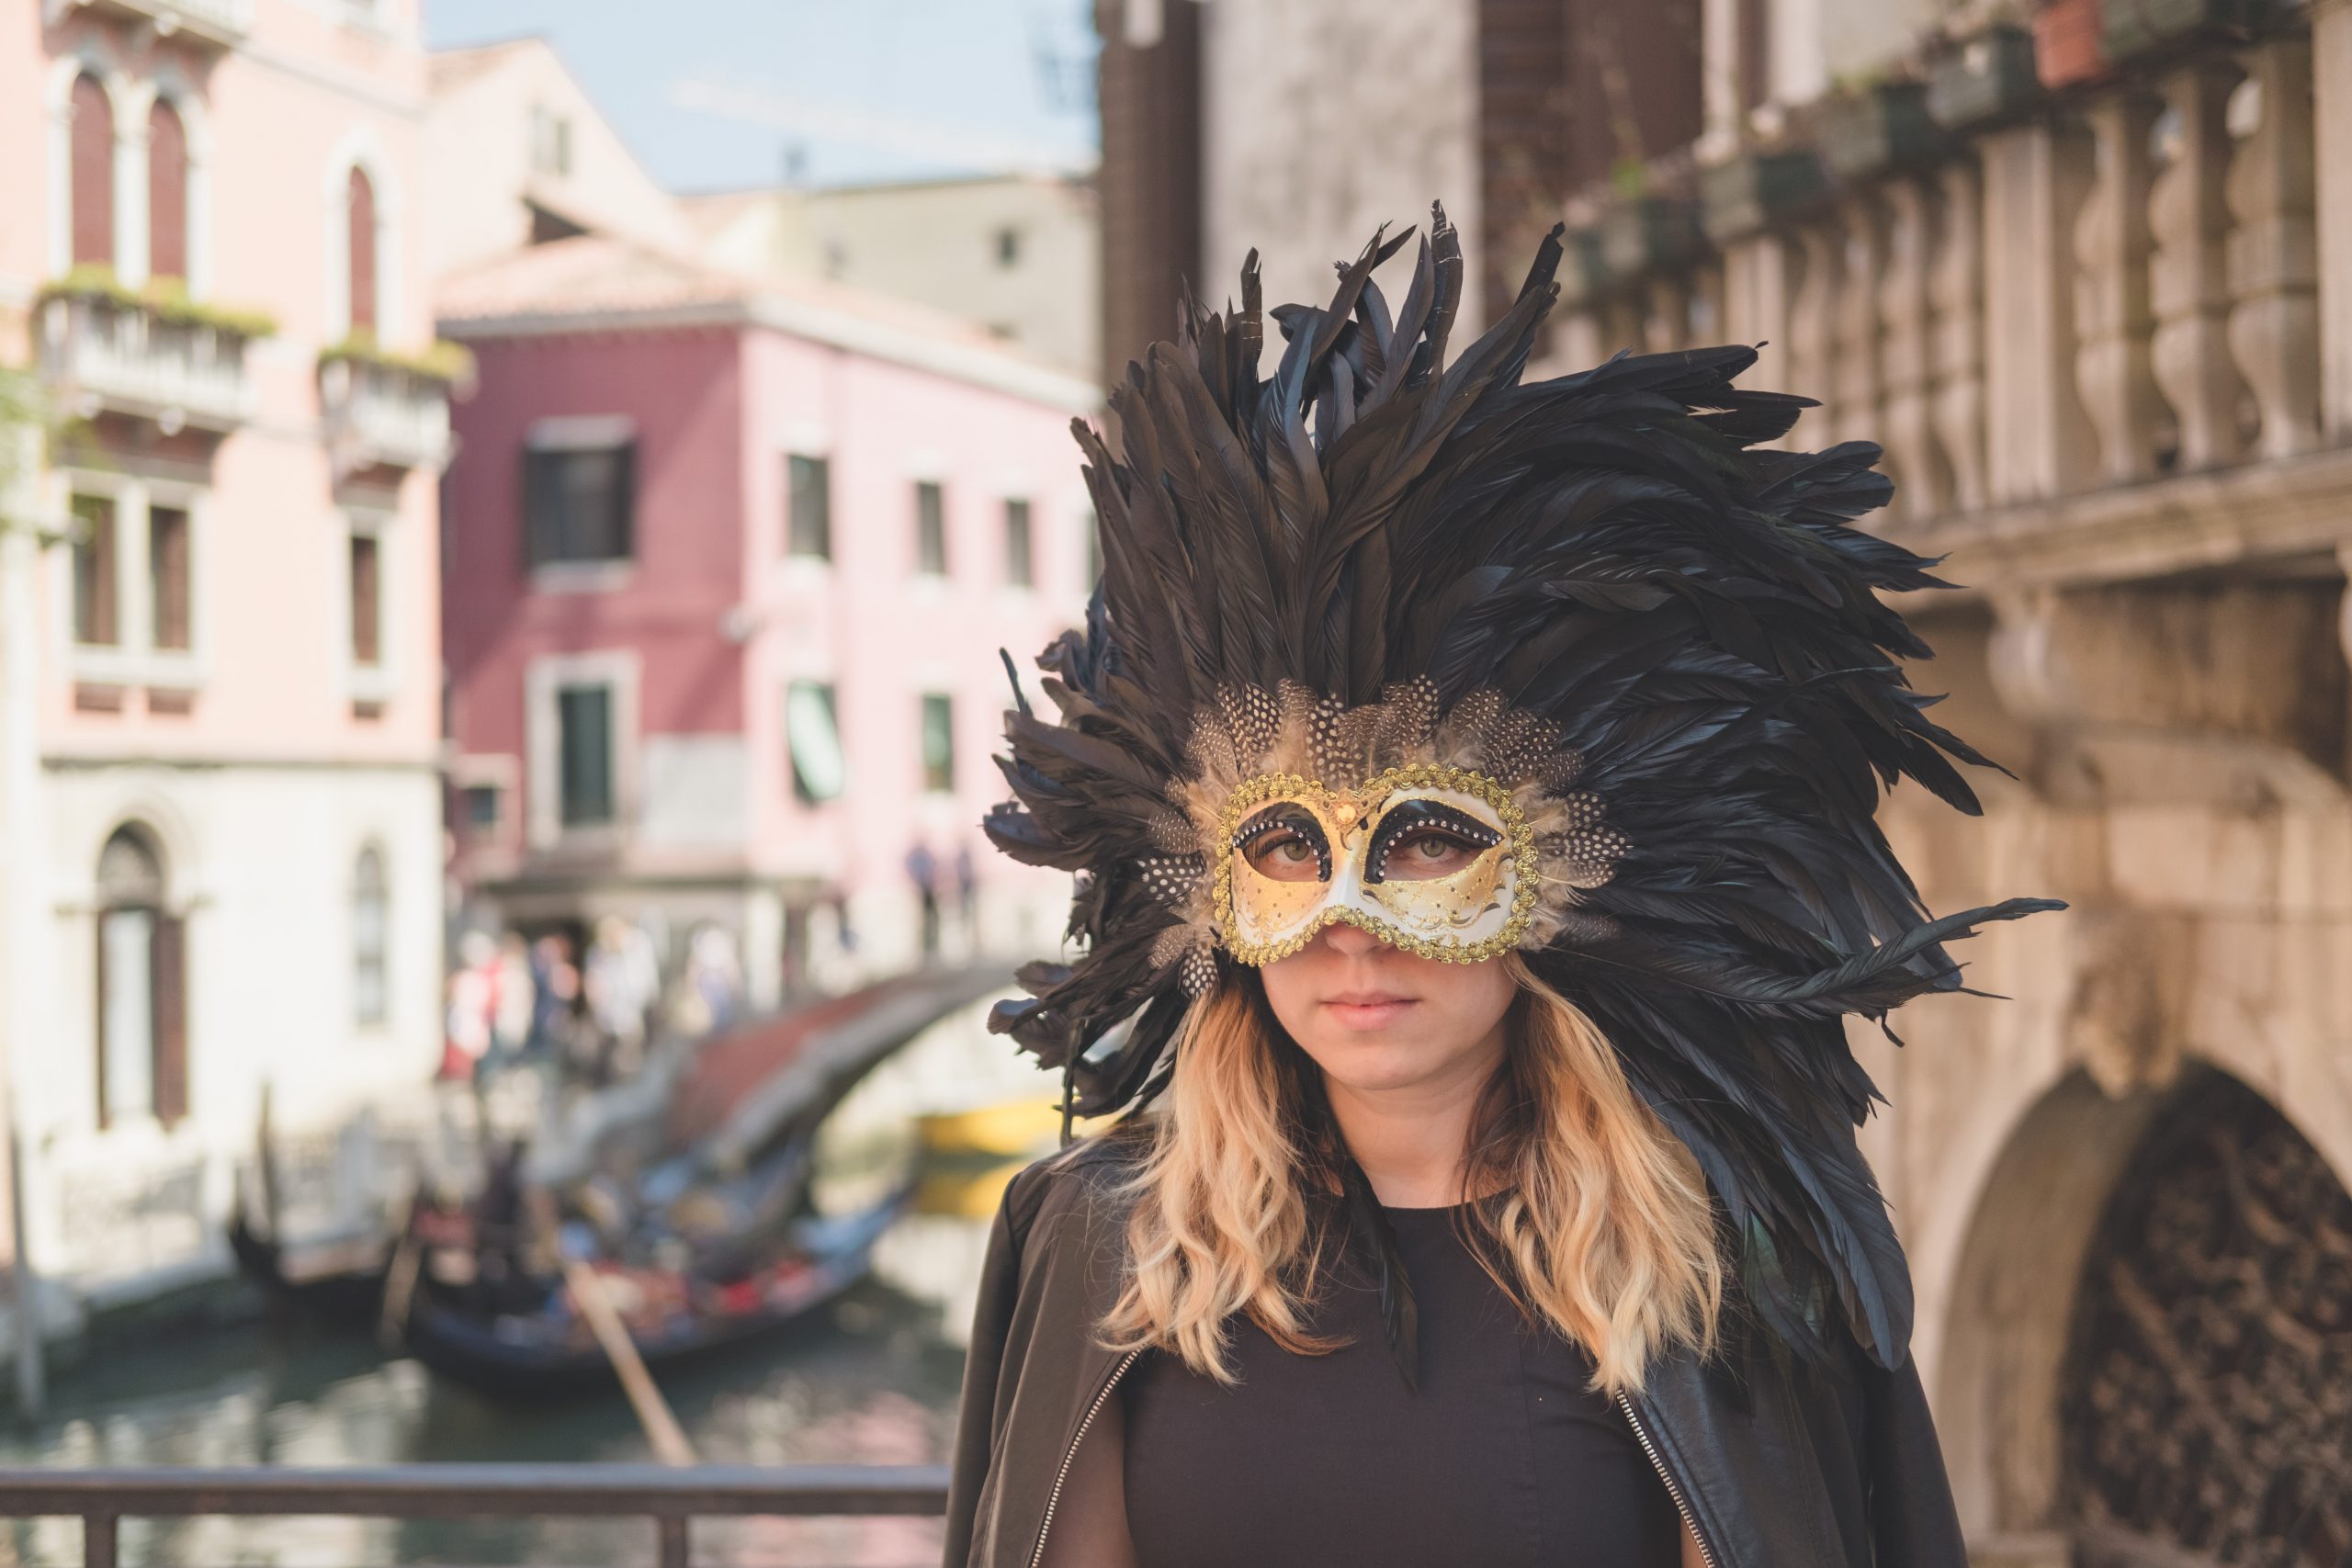 Cory from You Could Travel wearing a Venetian mask in Venice during her Porec to Venice day trip